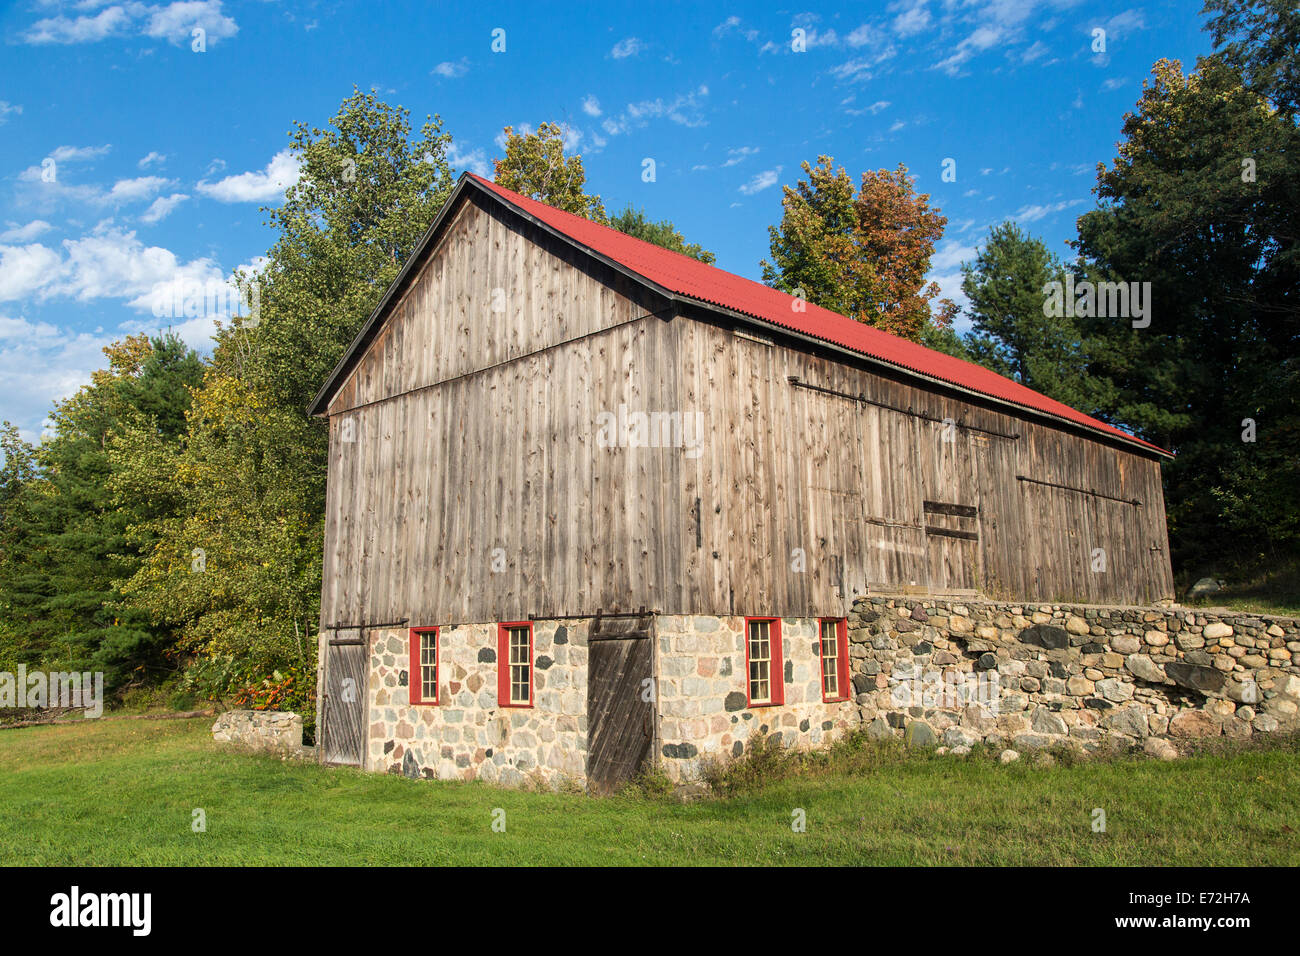 Rustic wooden barn built in 1906 on the Old Mission Peninsula near Traverse City, Michigan, USA. Stock Photo